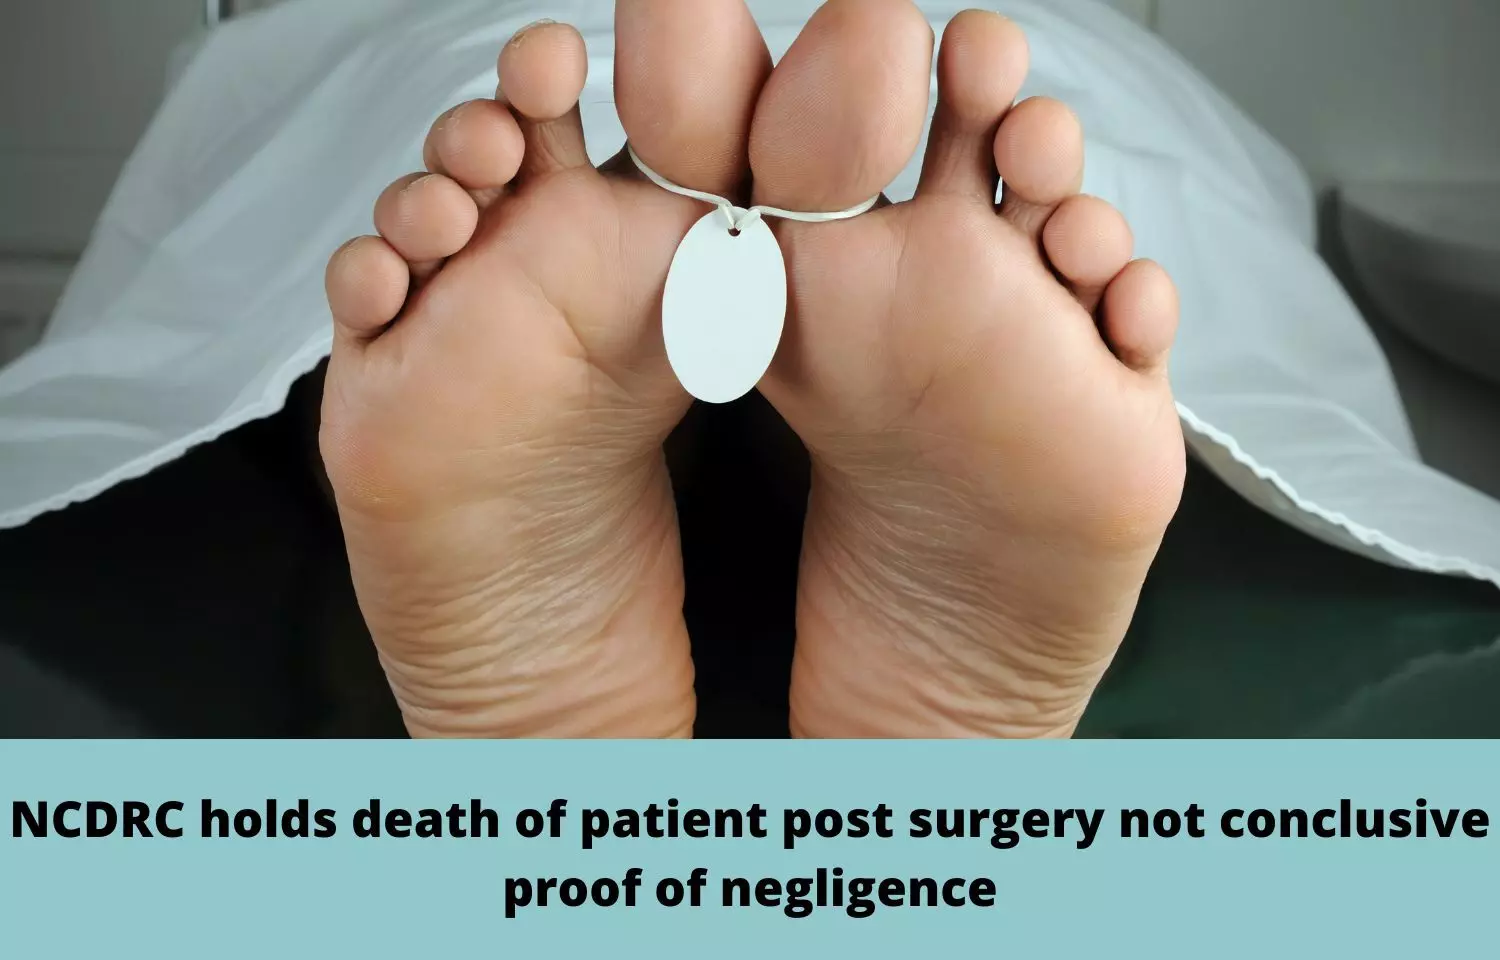 Relief to Anesthetist after 25 years: NCDRC holds death of patient post surgery not conclusive proof of negligence